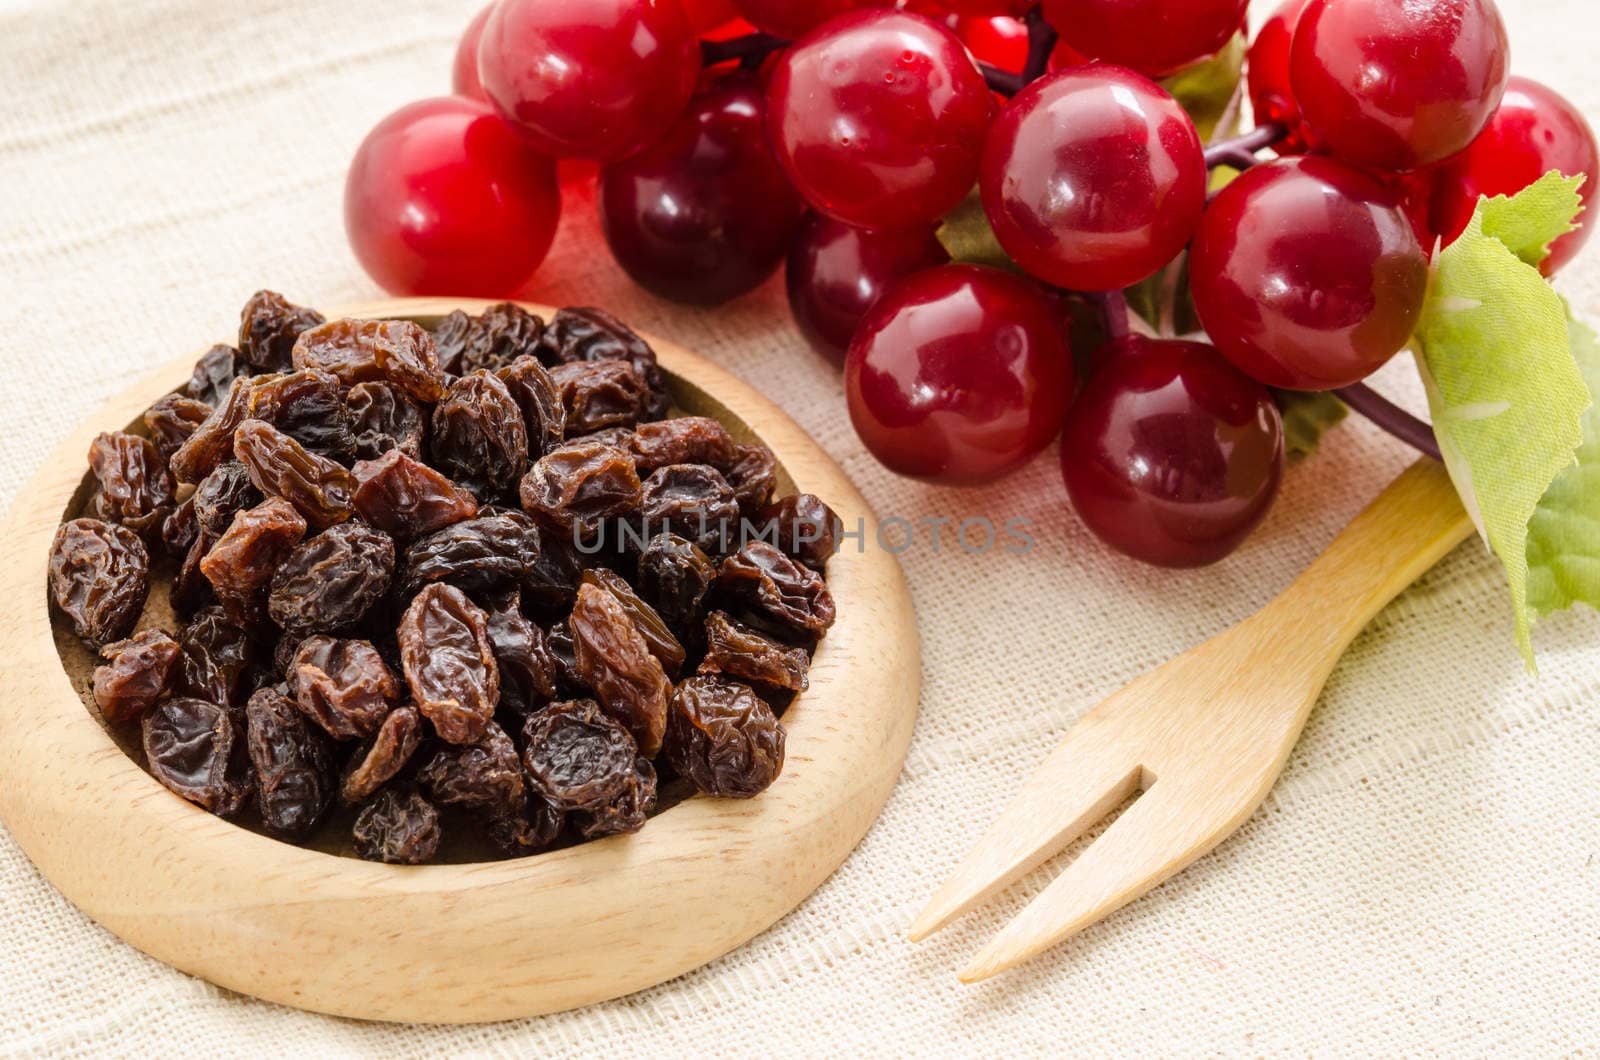 Raisins on a wooden dish and fresh red grapes. by Gamjai